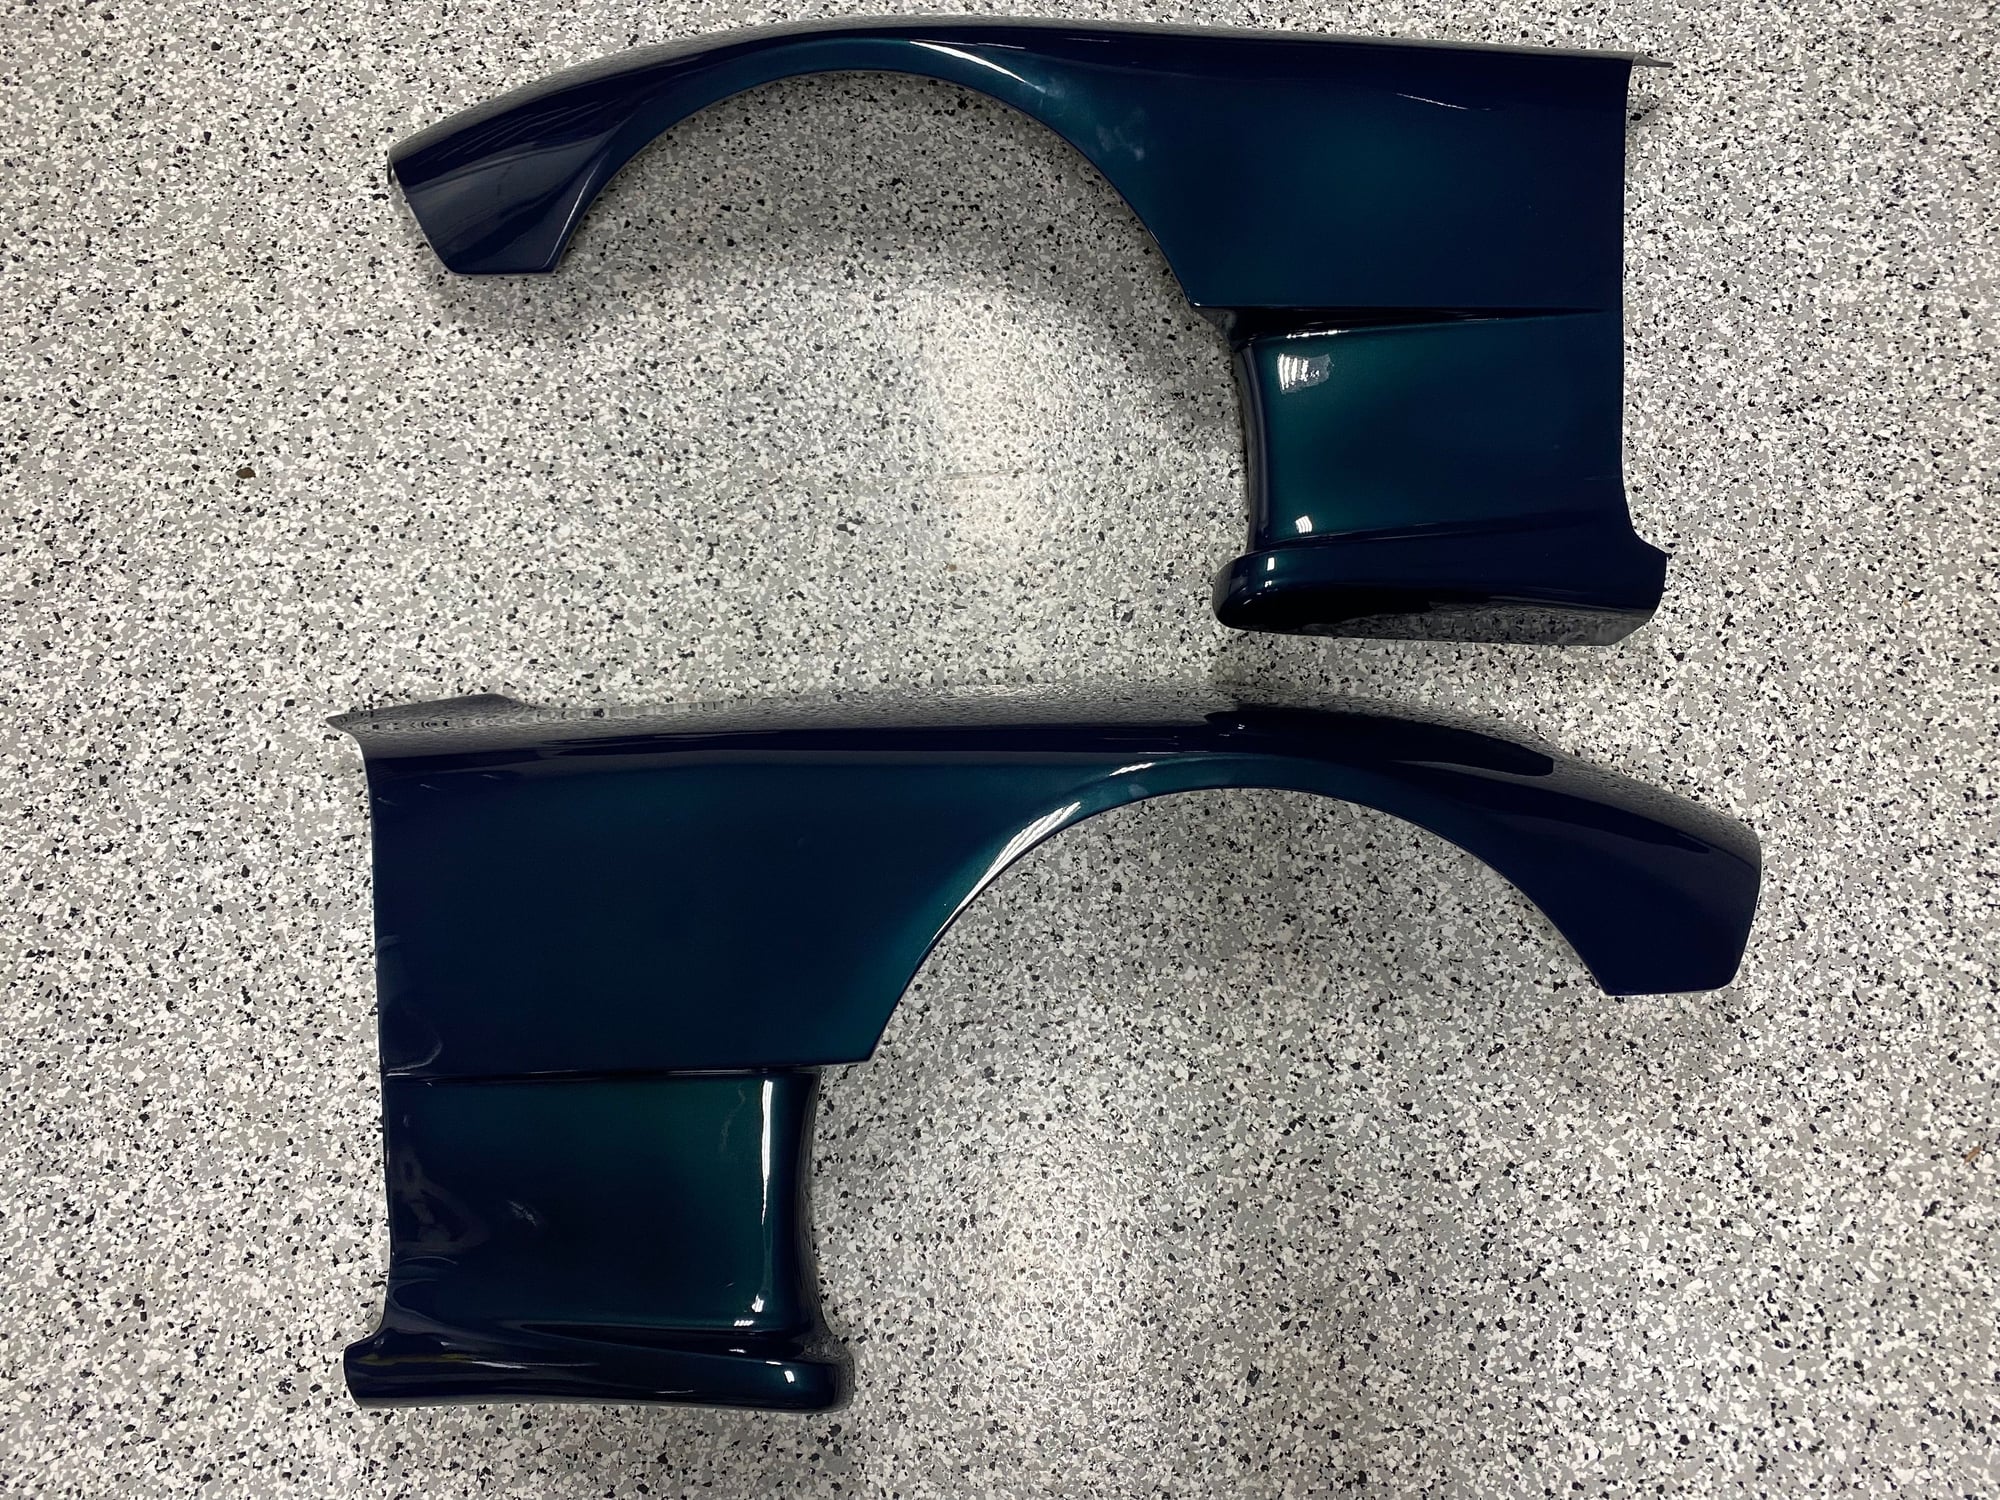 Exterior Body Parts - Genuine FEED front fenders ( MONTEGO BLUE) - New - 1993 to 1995 Mazda RX-7 - Bend, OR 97701, United States